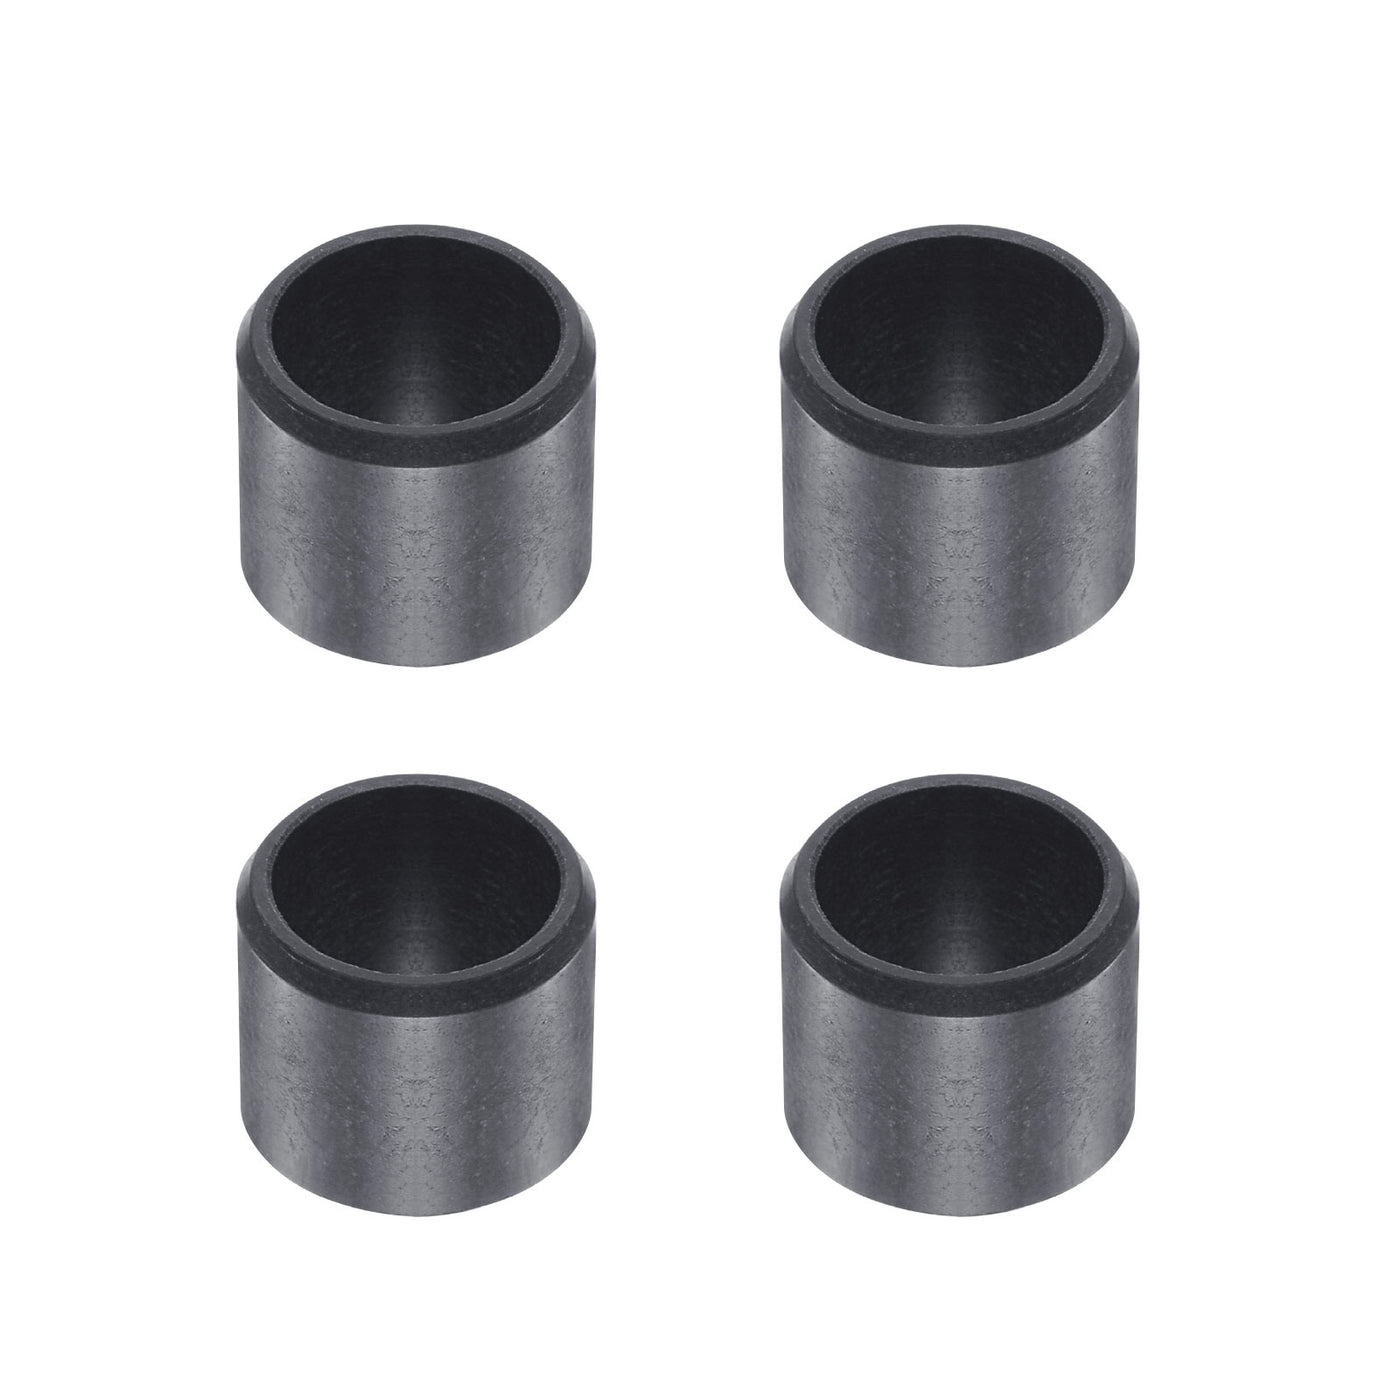 uxcell Uxcell Sleeve Bearings 8mmx10mmx6mm POM Wrapped Oilless Bushings Black 4pcs